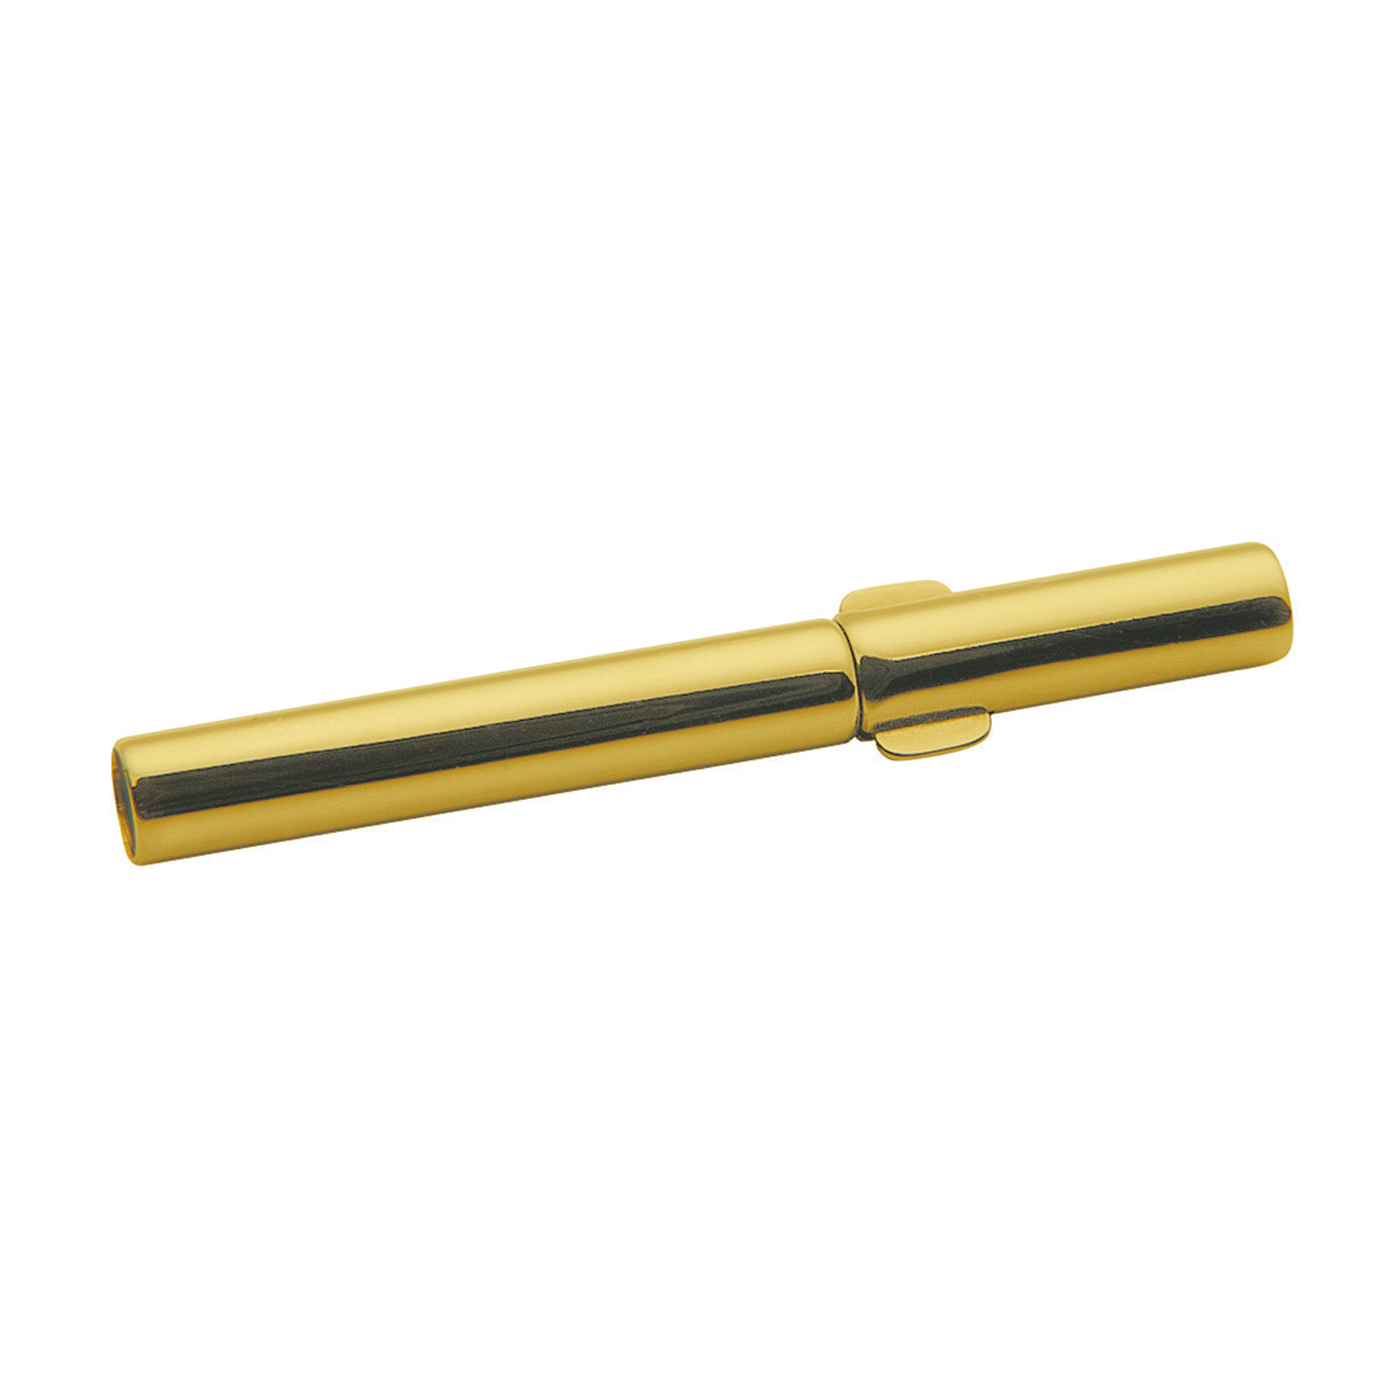 Double Clip Clasp, Stainless Steel Gold-Pl., ø 2.0 x 1.7 mm - 1 piece